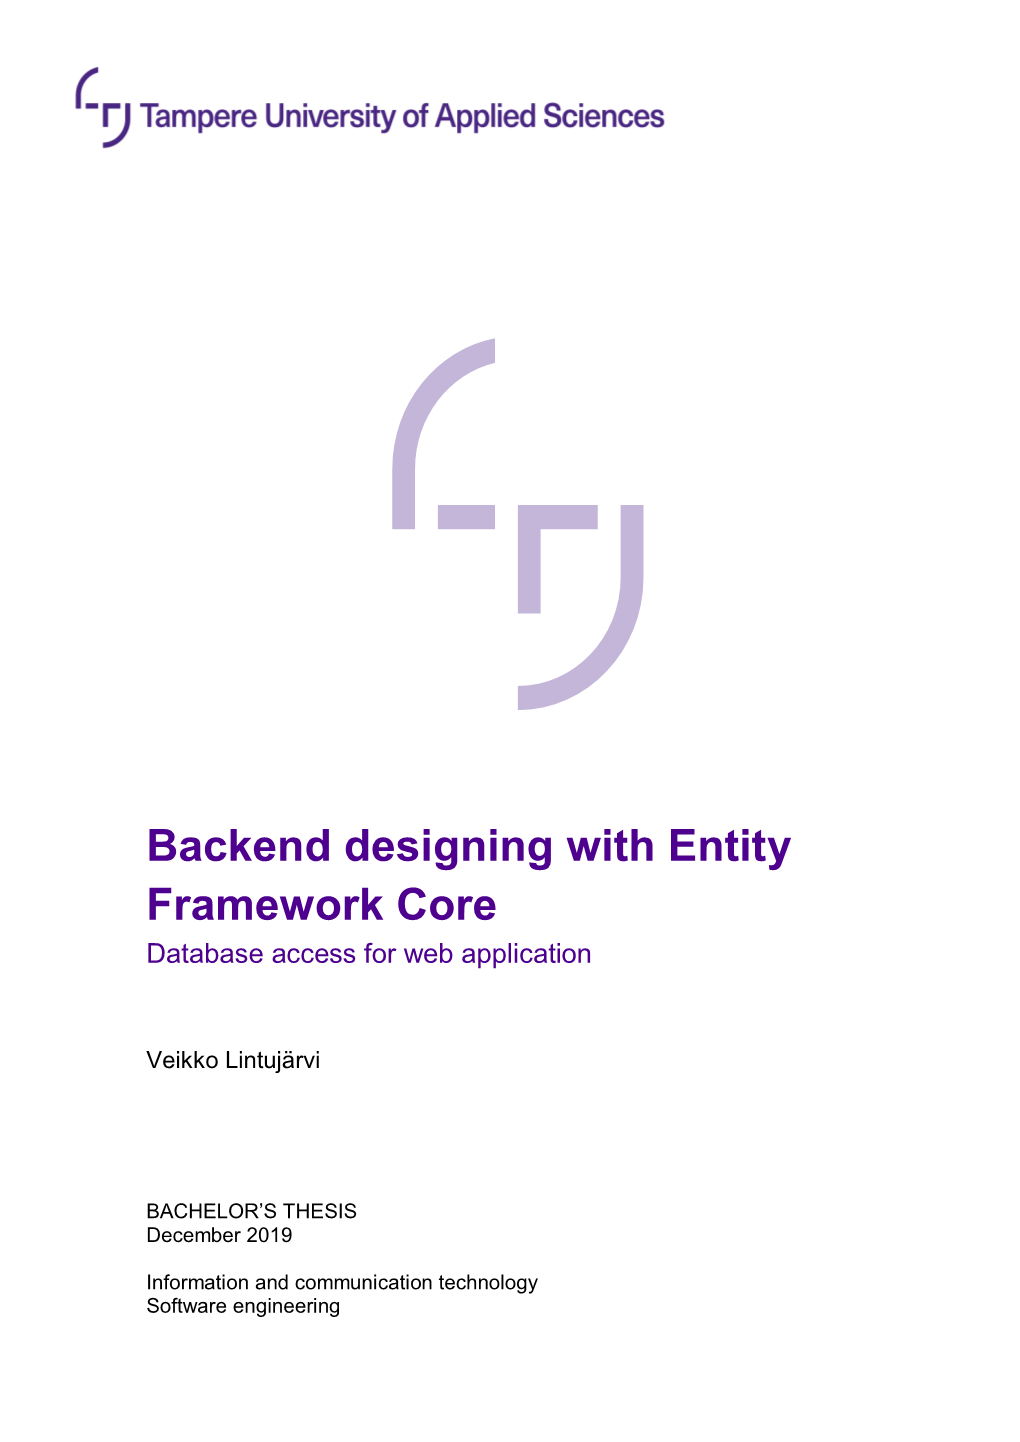 Backend Designing with Entity Framework Core Database Access for Web Application